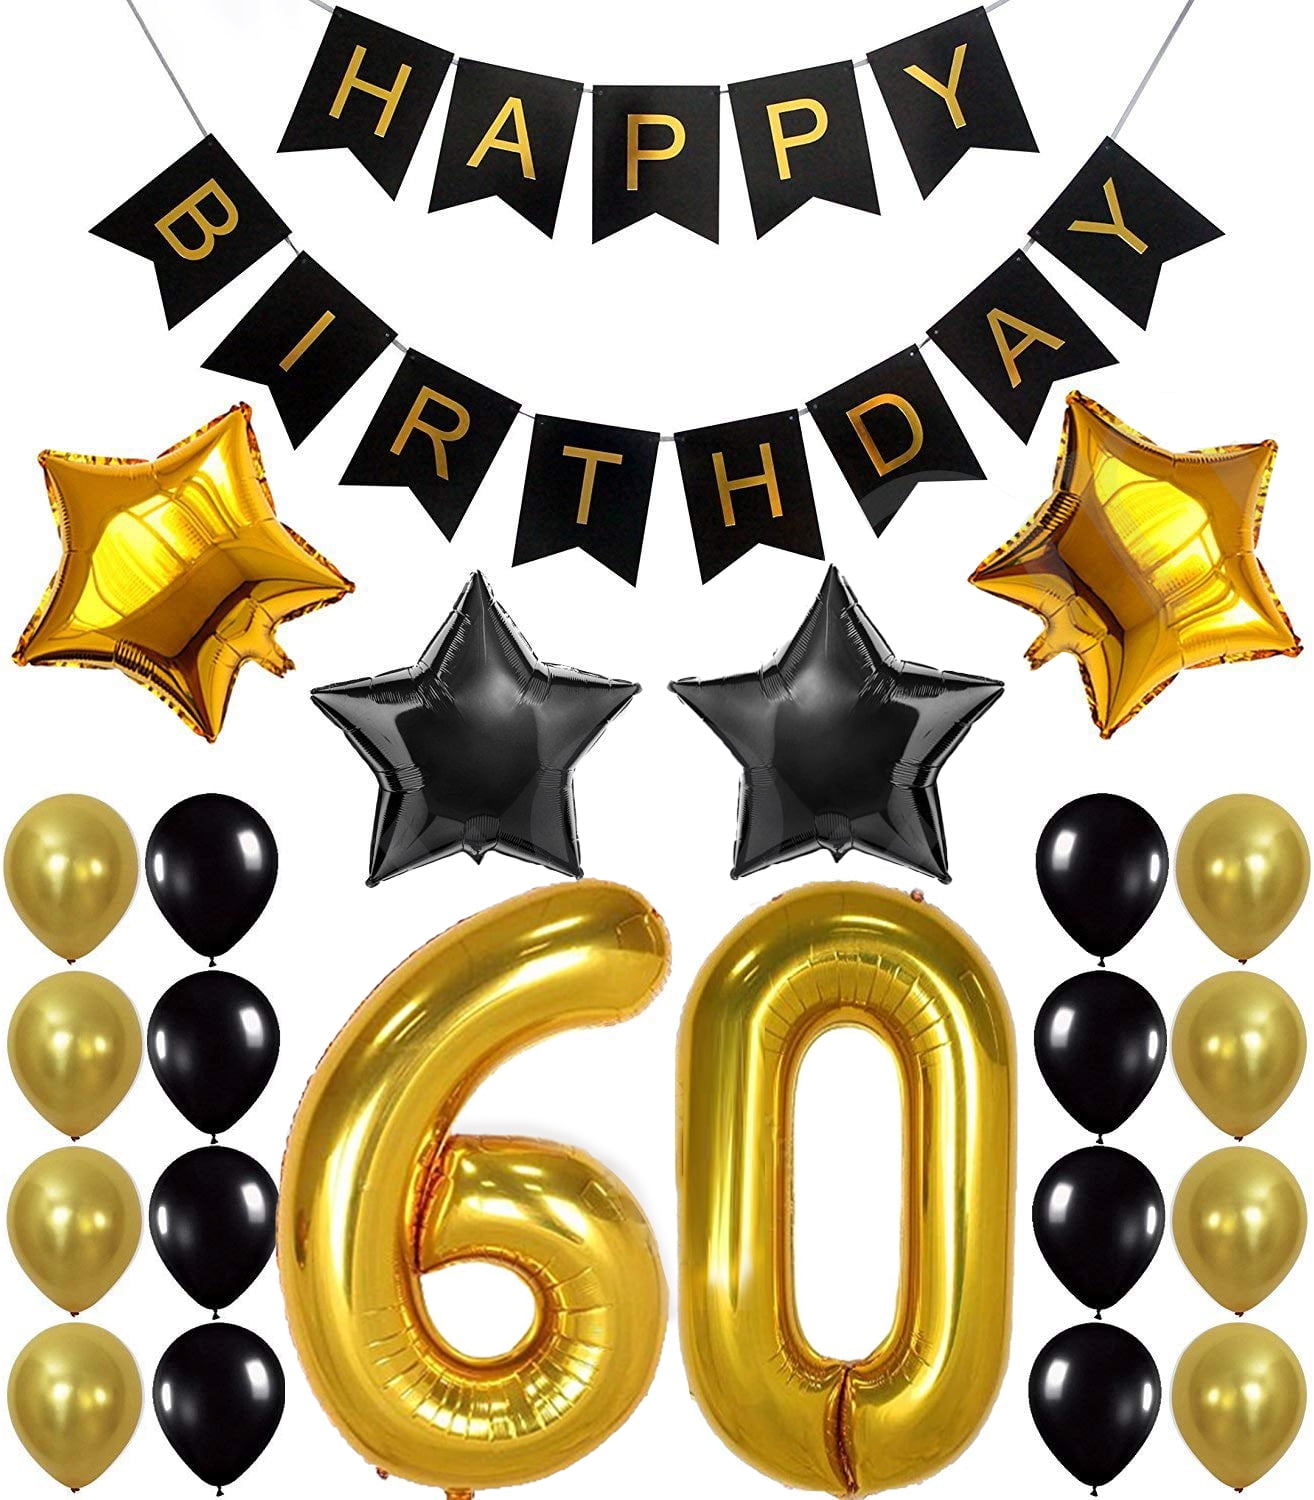 60th Birthday Table Confetti 3 Bag Assortment Parties & Events Age 60 New